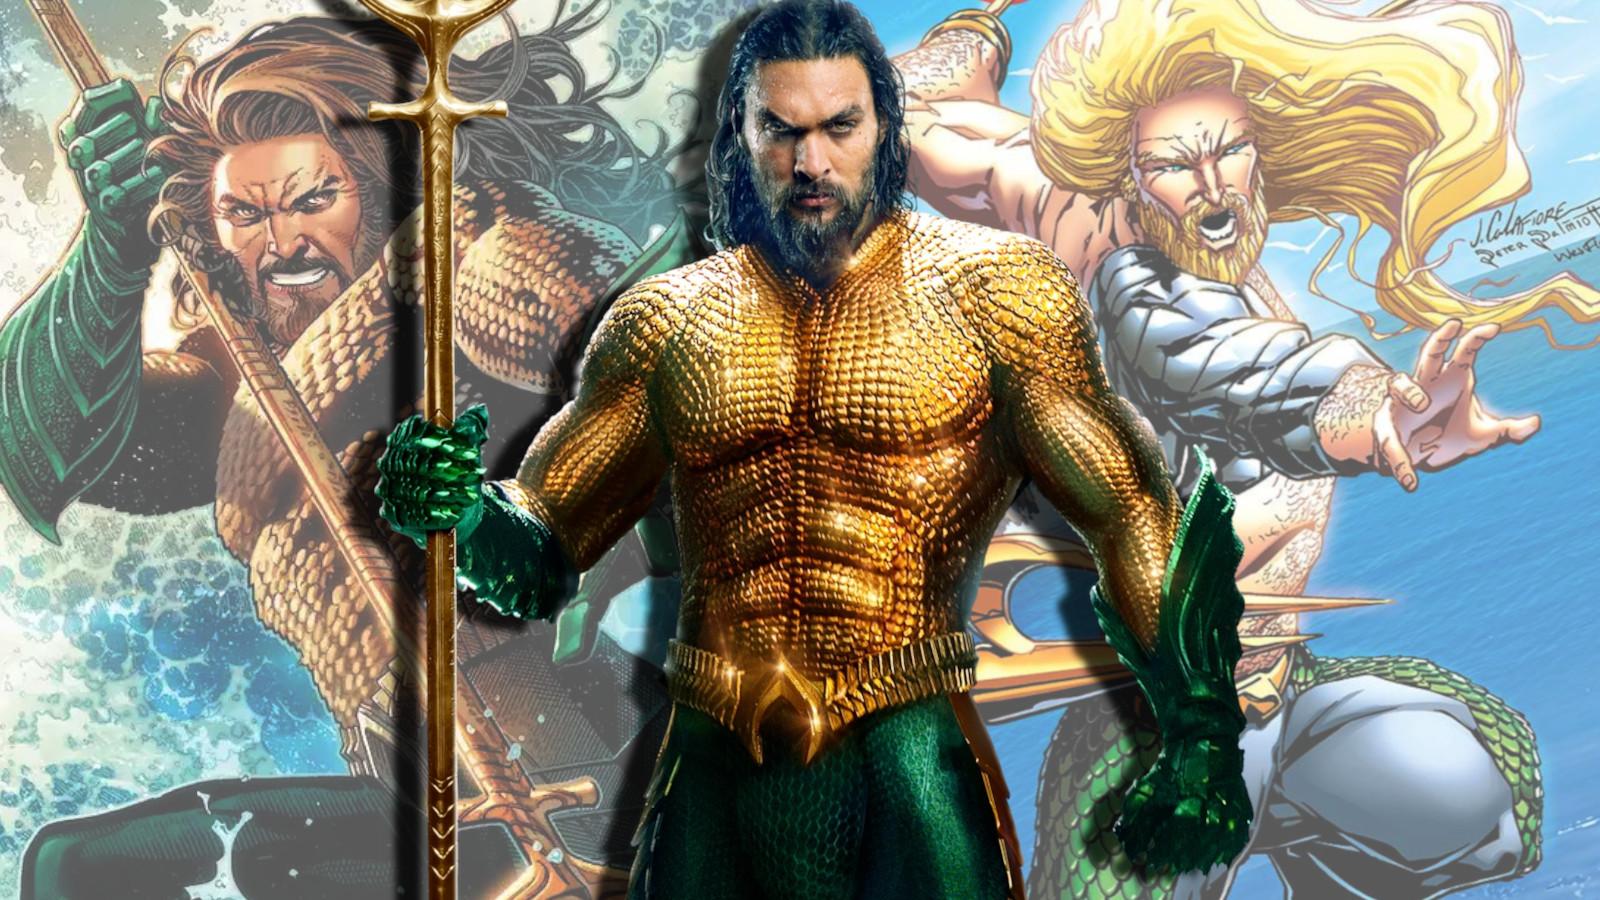 Aquaman in DC Comics and the DC Extended Universe